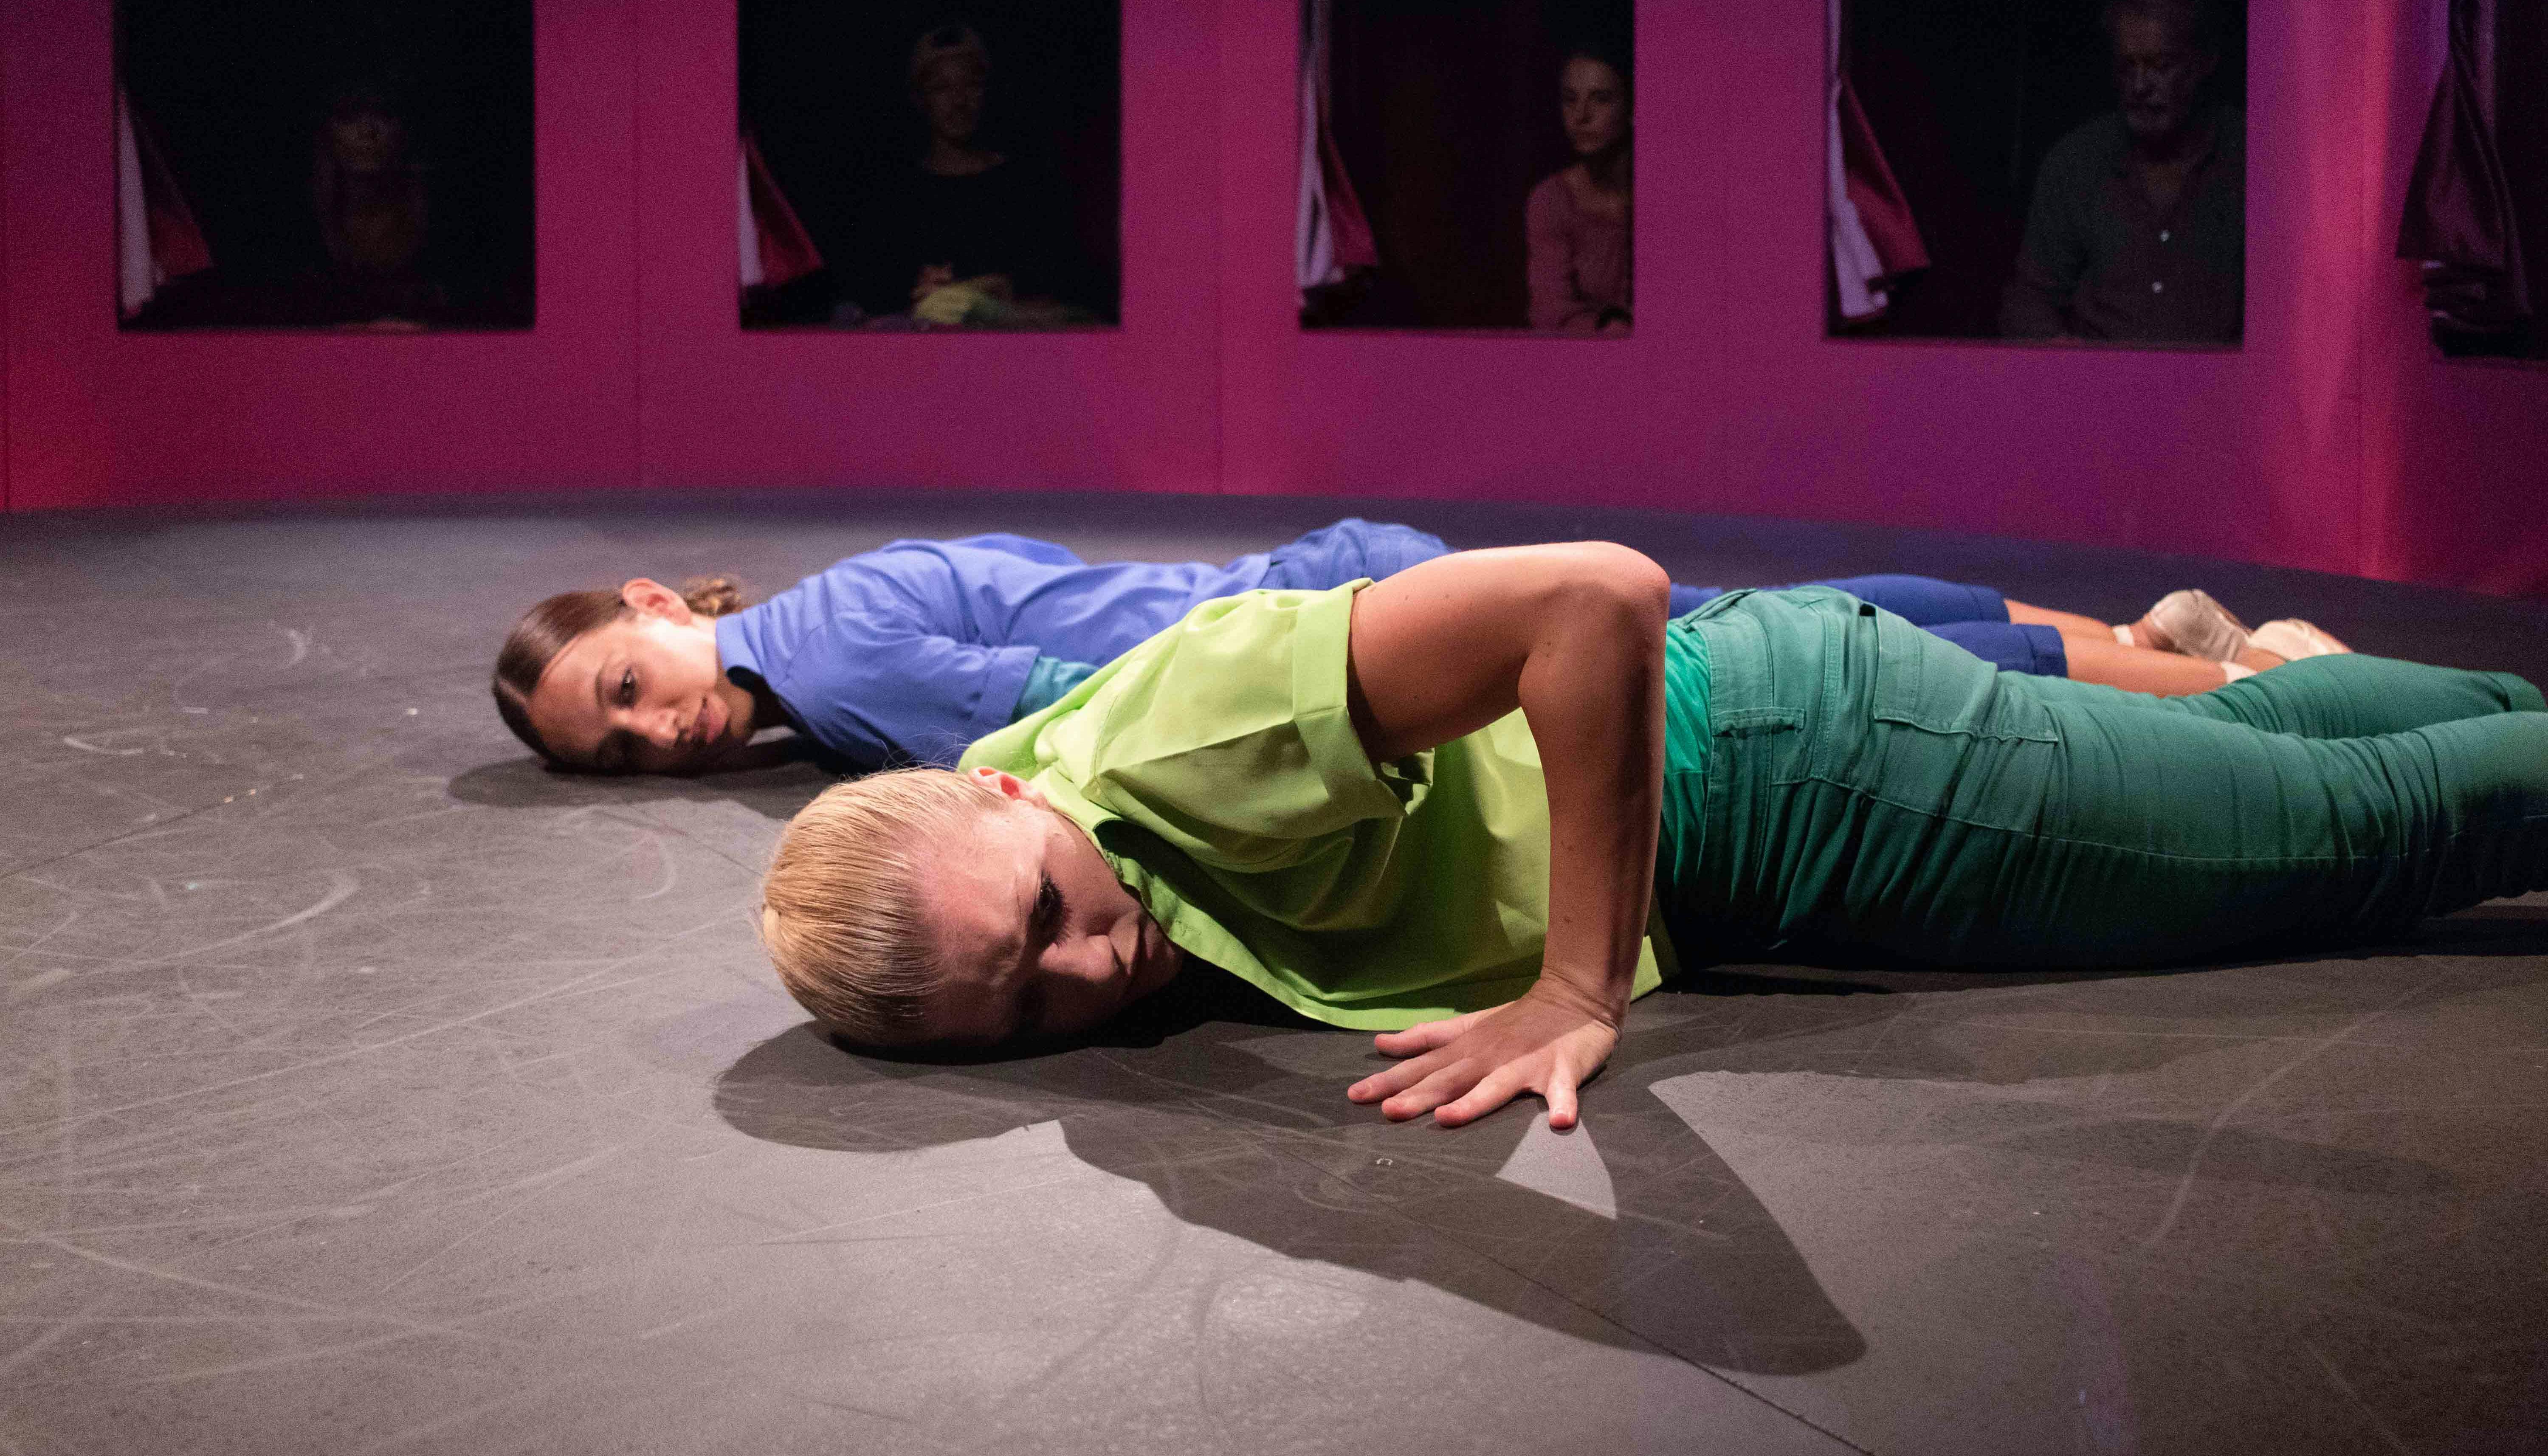 Two dancers are lying prone on the ground, parallel to each other. One is dressed in blue, the other in green. Behind them, through a series of windows, some spectators watch.